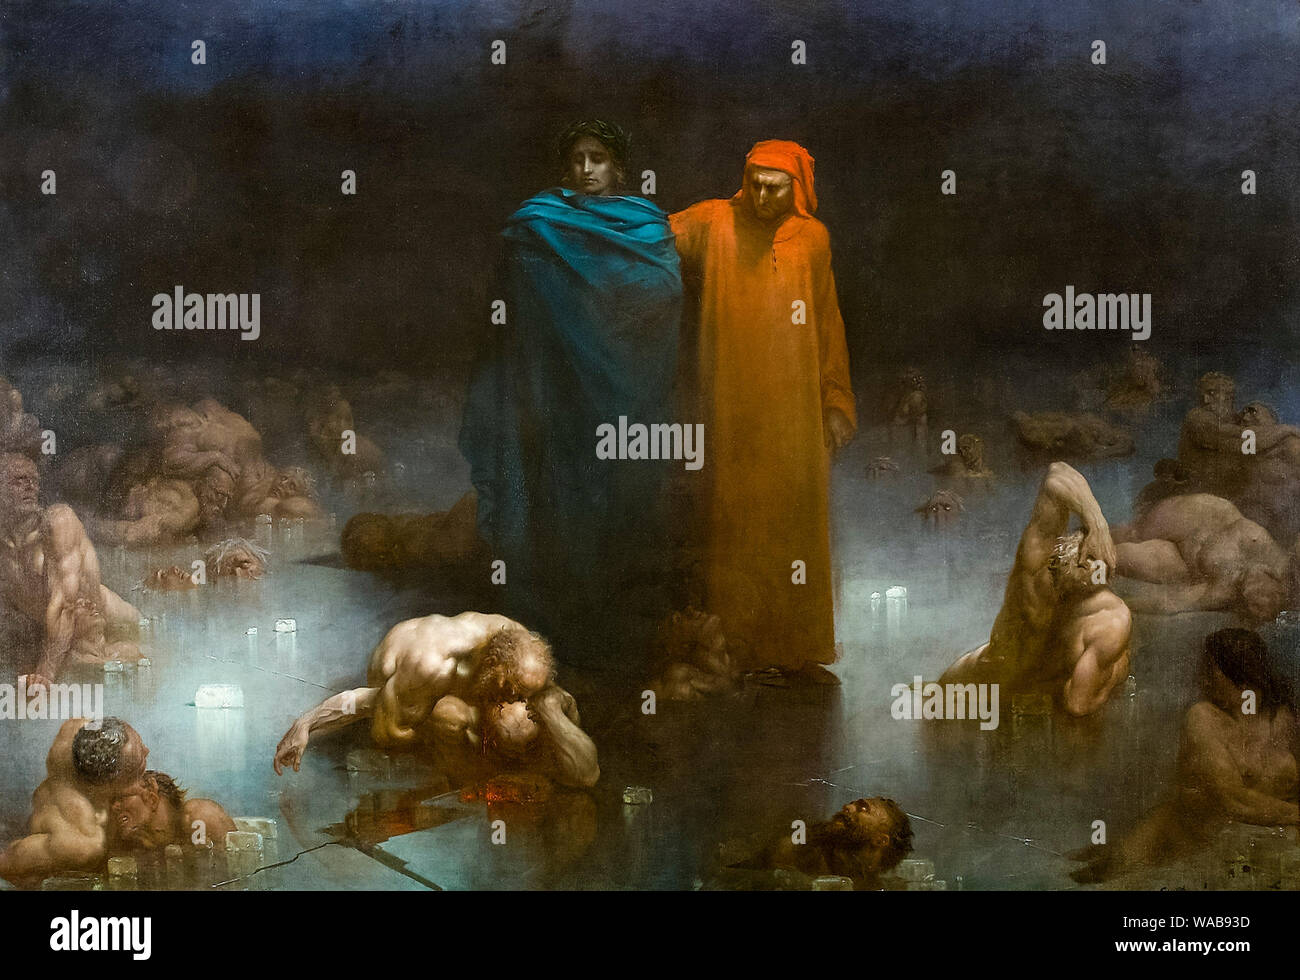 Gustave Doré, Dante and Virgil in the Ninth Circle of Hell, Divine Comedy painting, 1861 Stock Photo